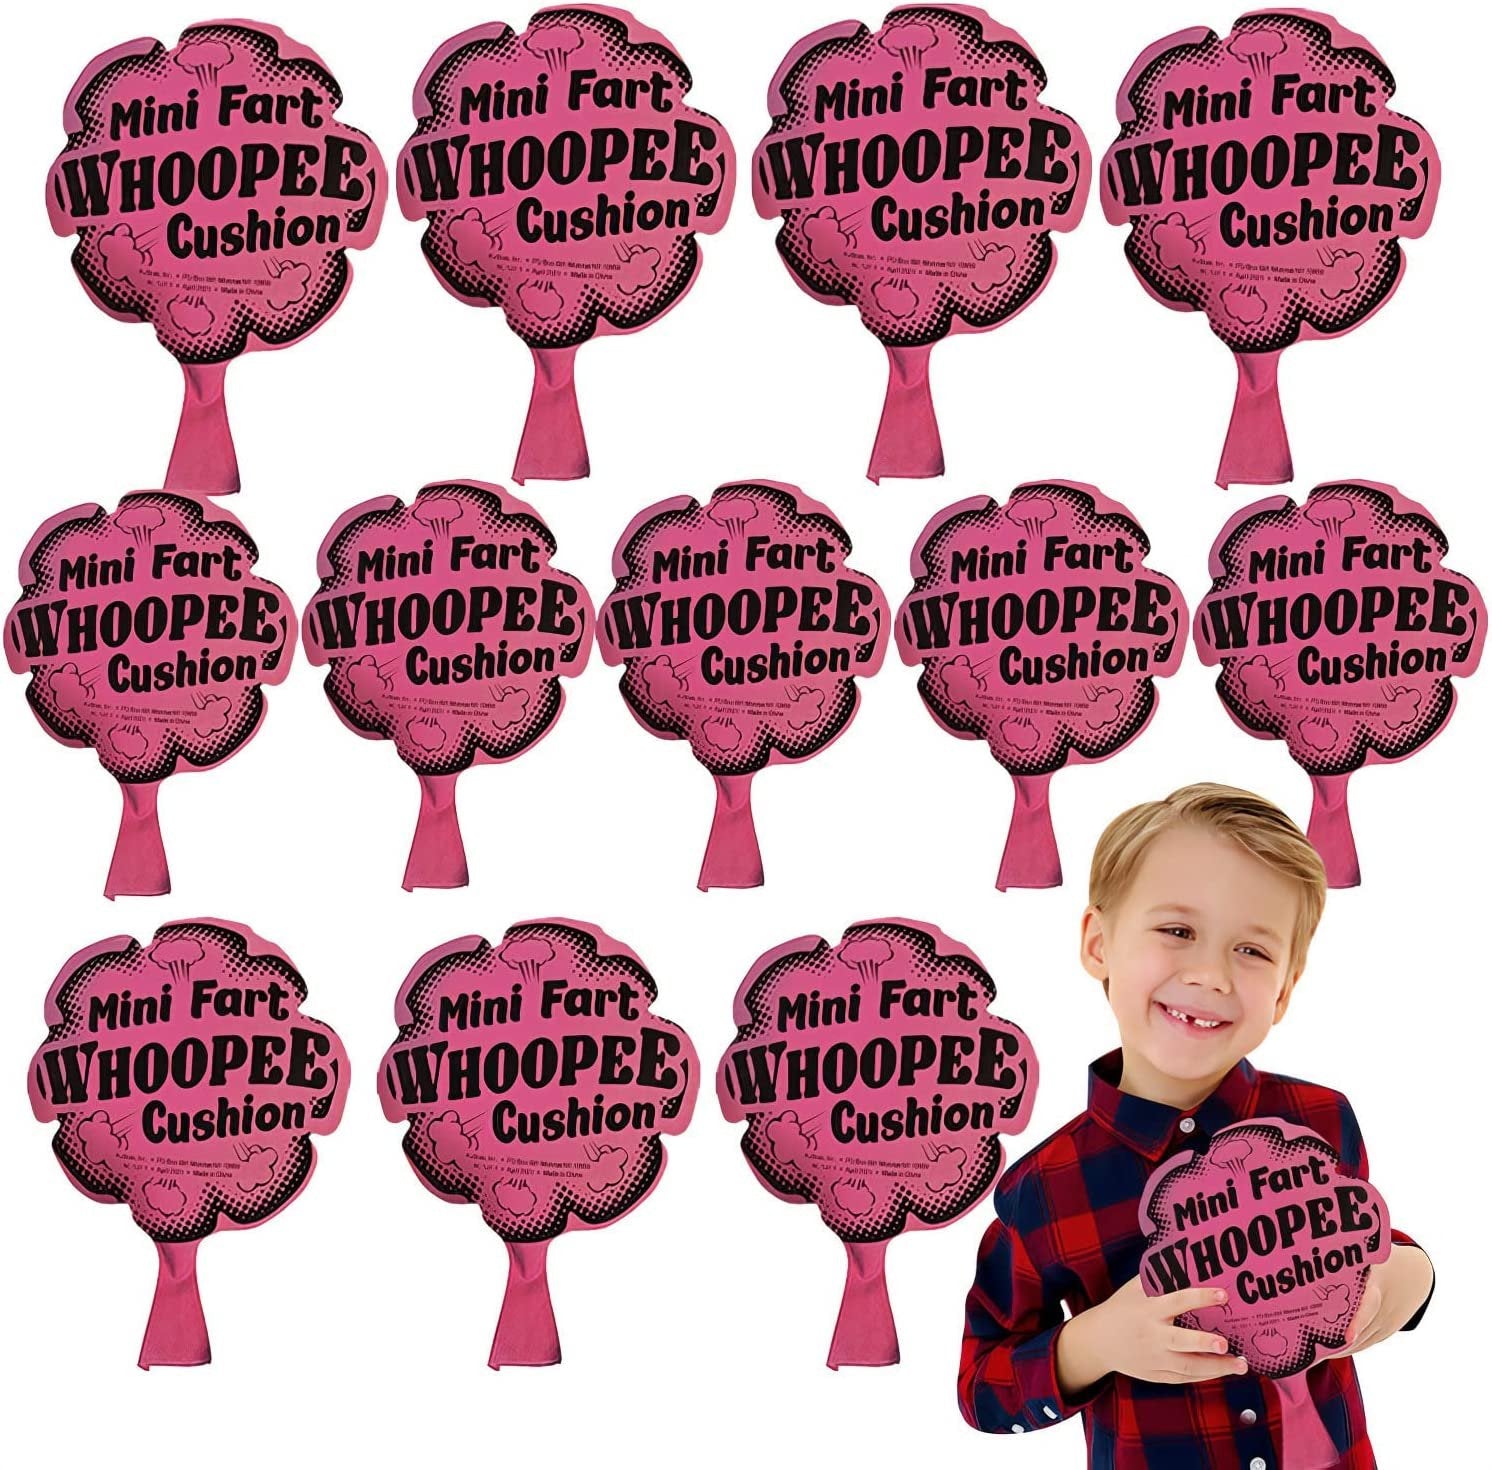 6" Mini Fart Whoopee Cushions - Set of 12 - Fun Whoopee Noise Makers for Kids and Adults - 100% Non-Toxic Prank Toy - Novelty Gag Joke Gift - Birthday Party Favors for Boys and Girls